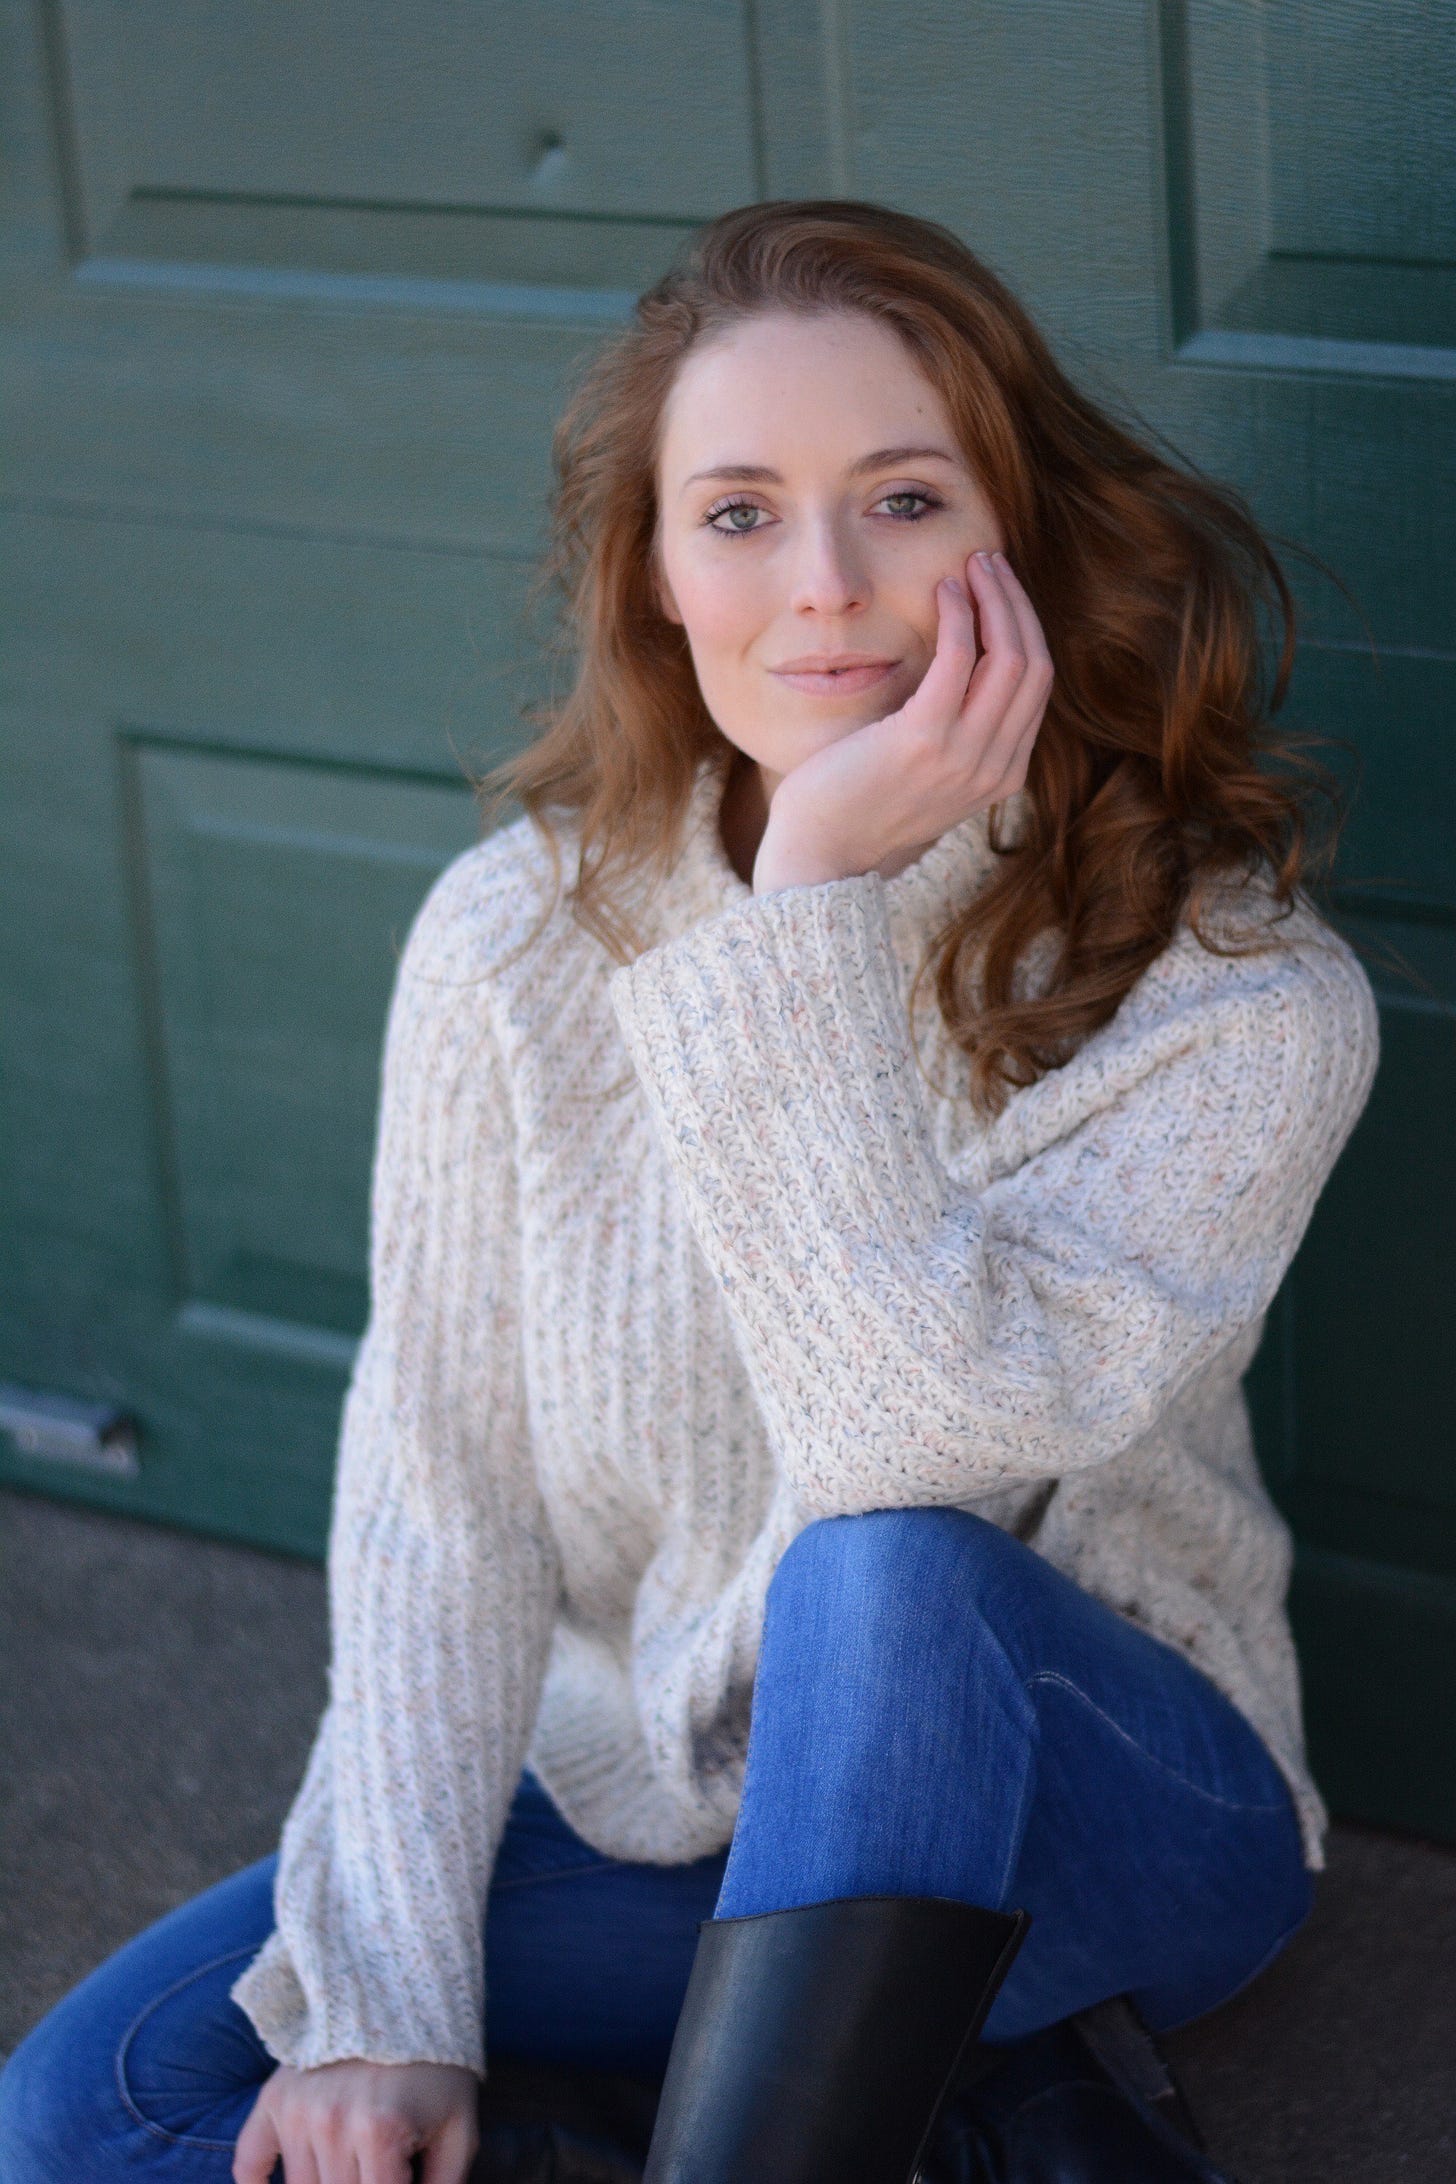 Author photo of the beautiful Jen Waite in a cream sweater against a dark teal door